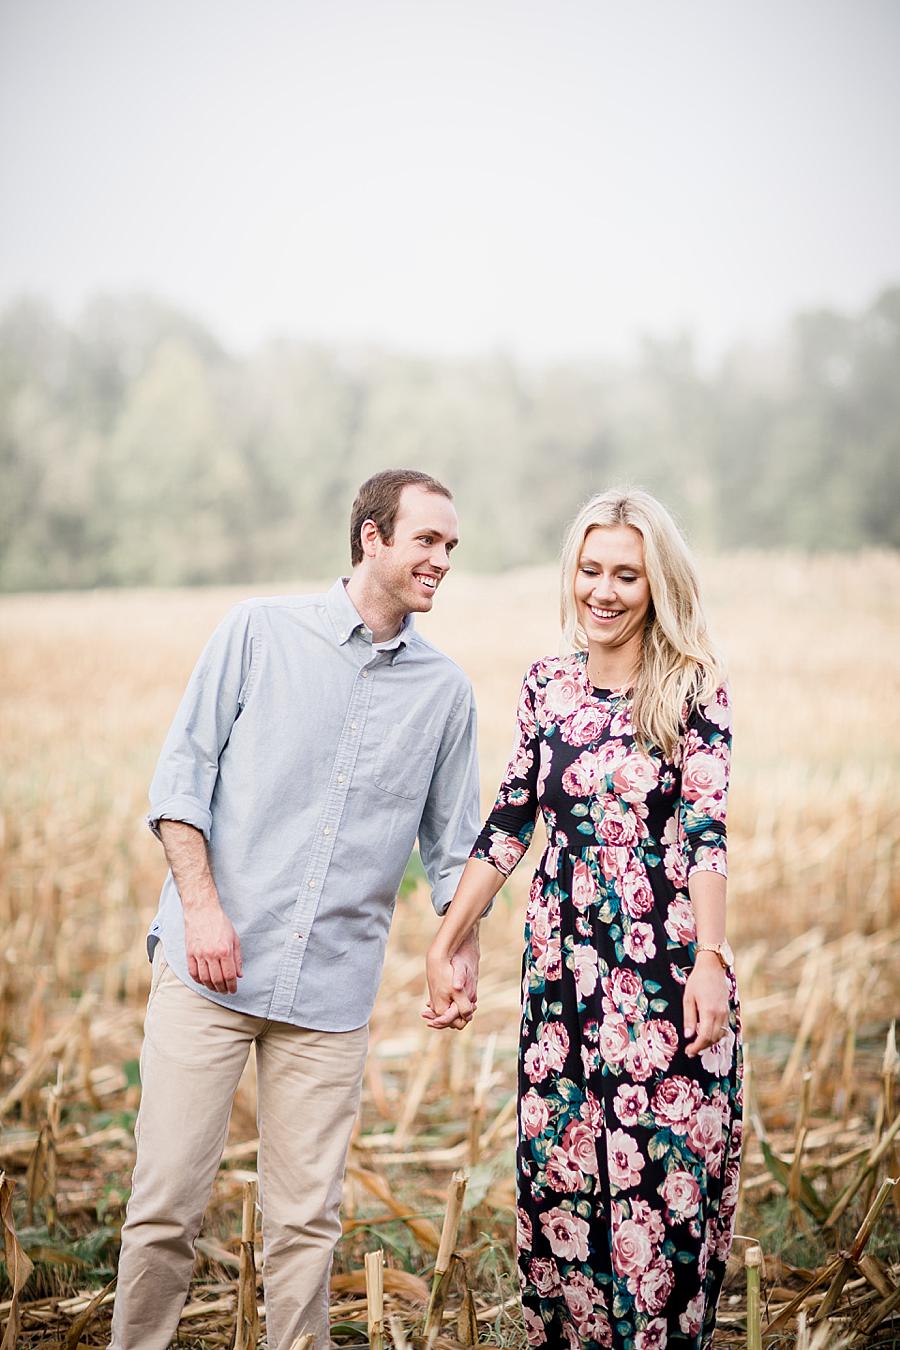 Chambray shirt at this Family Farm Engagement Session by Knoxville Wedding Photographer, Amanda May Photos.